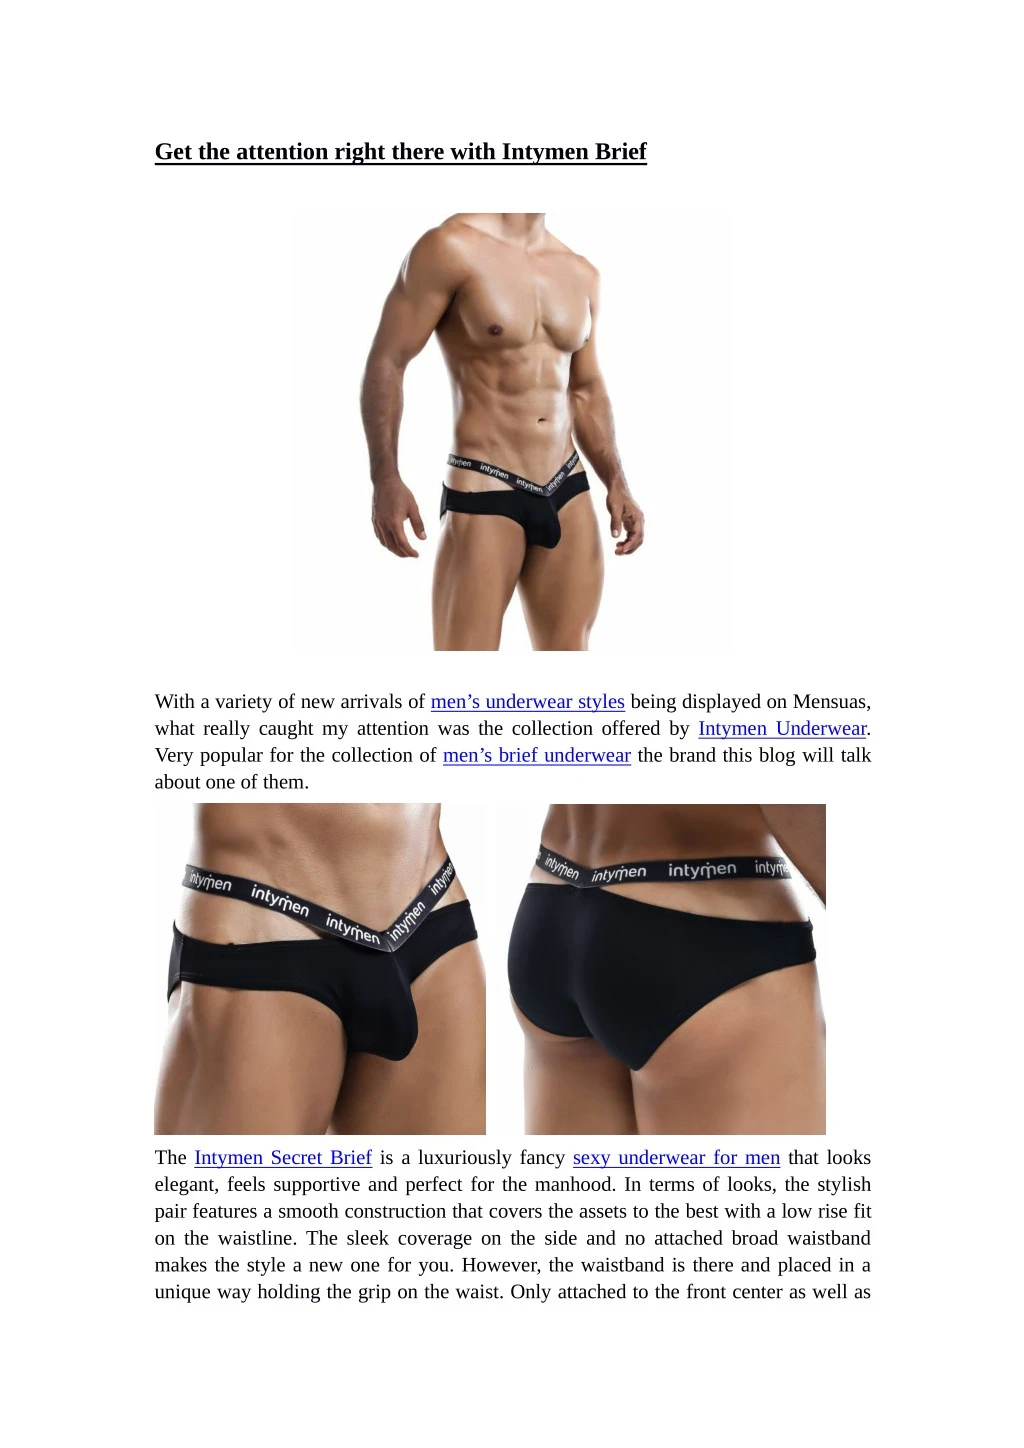 get the attention right there with intymen brief